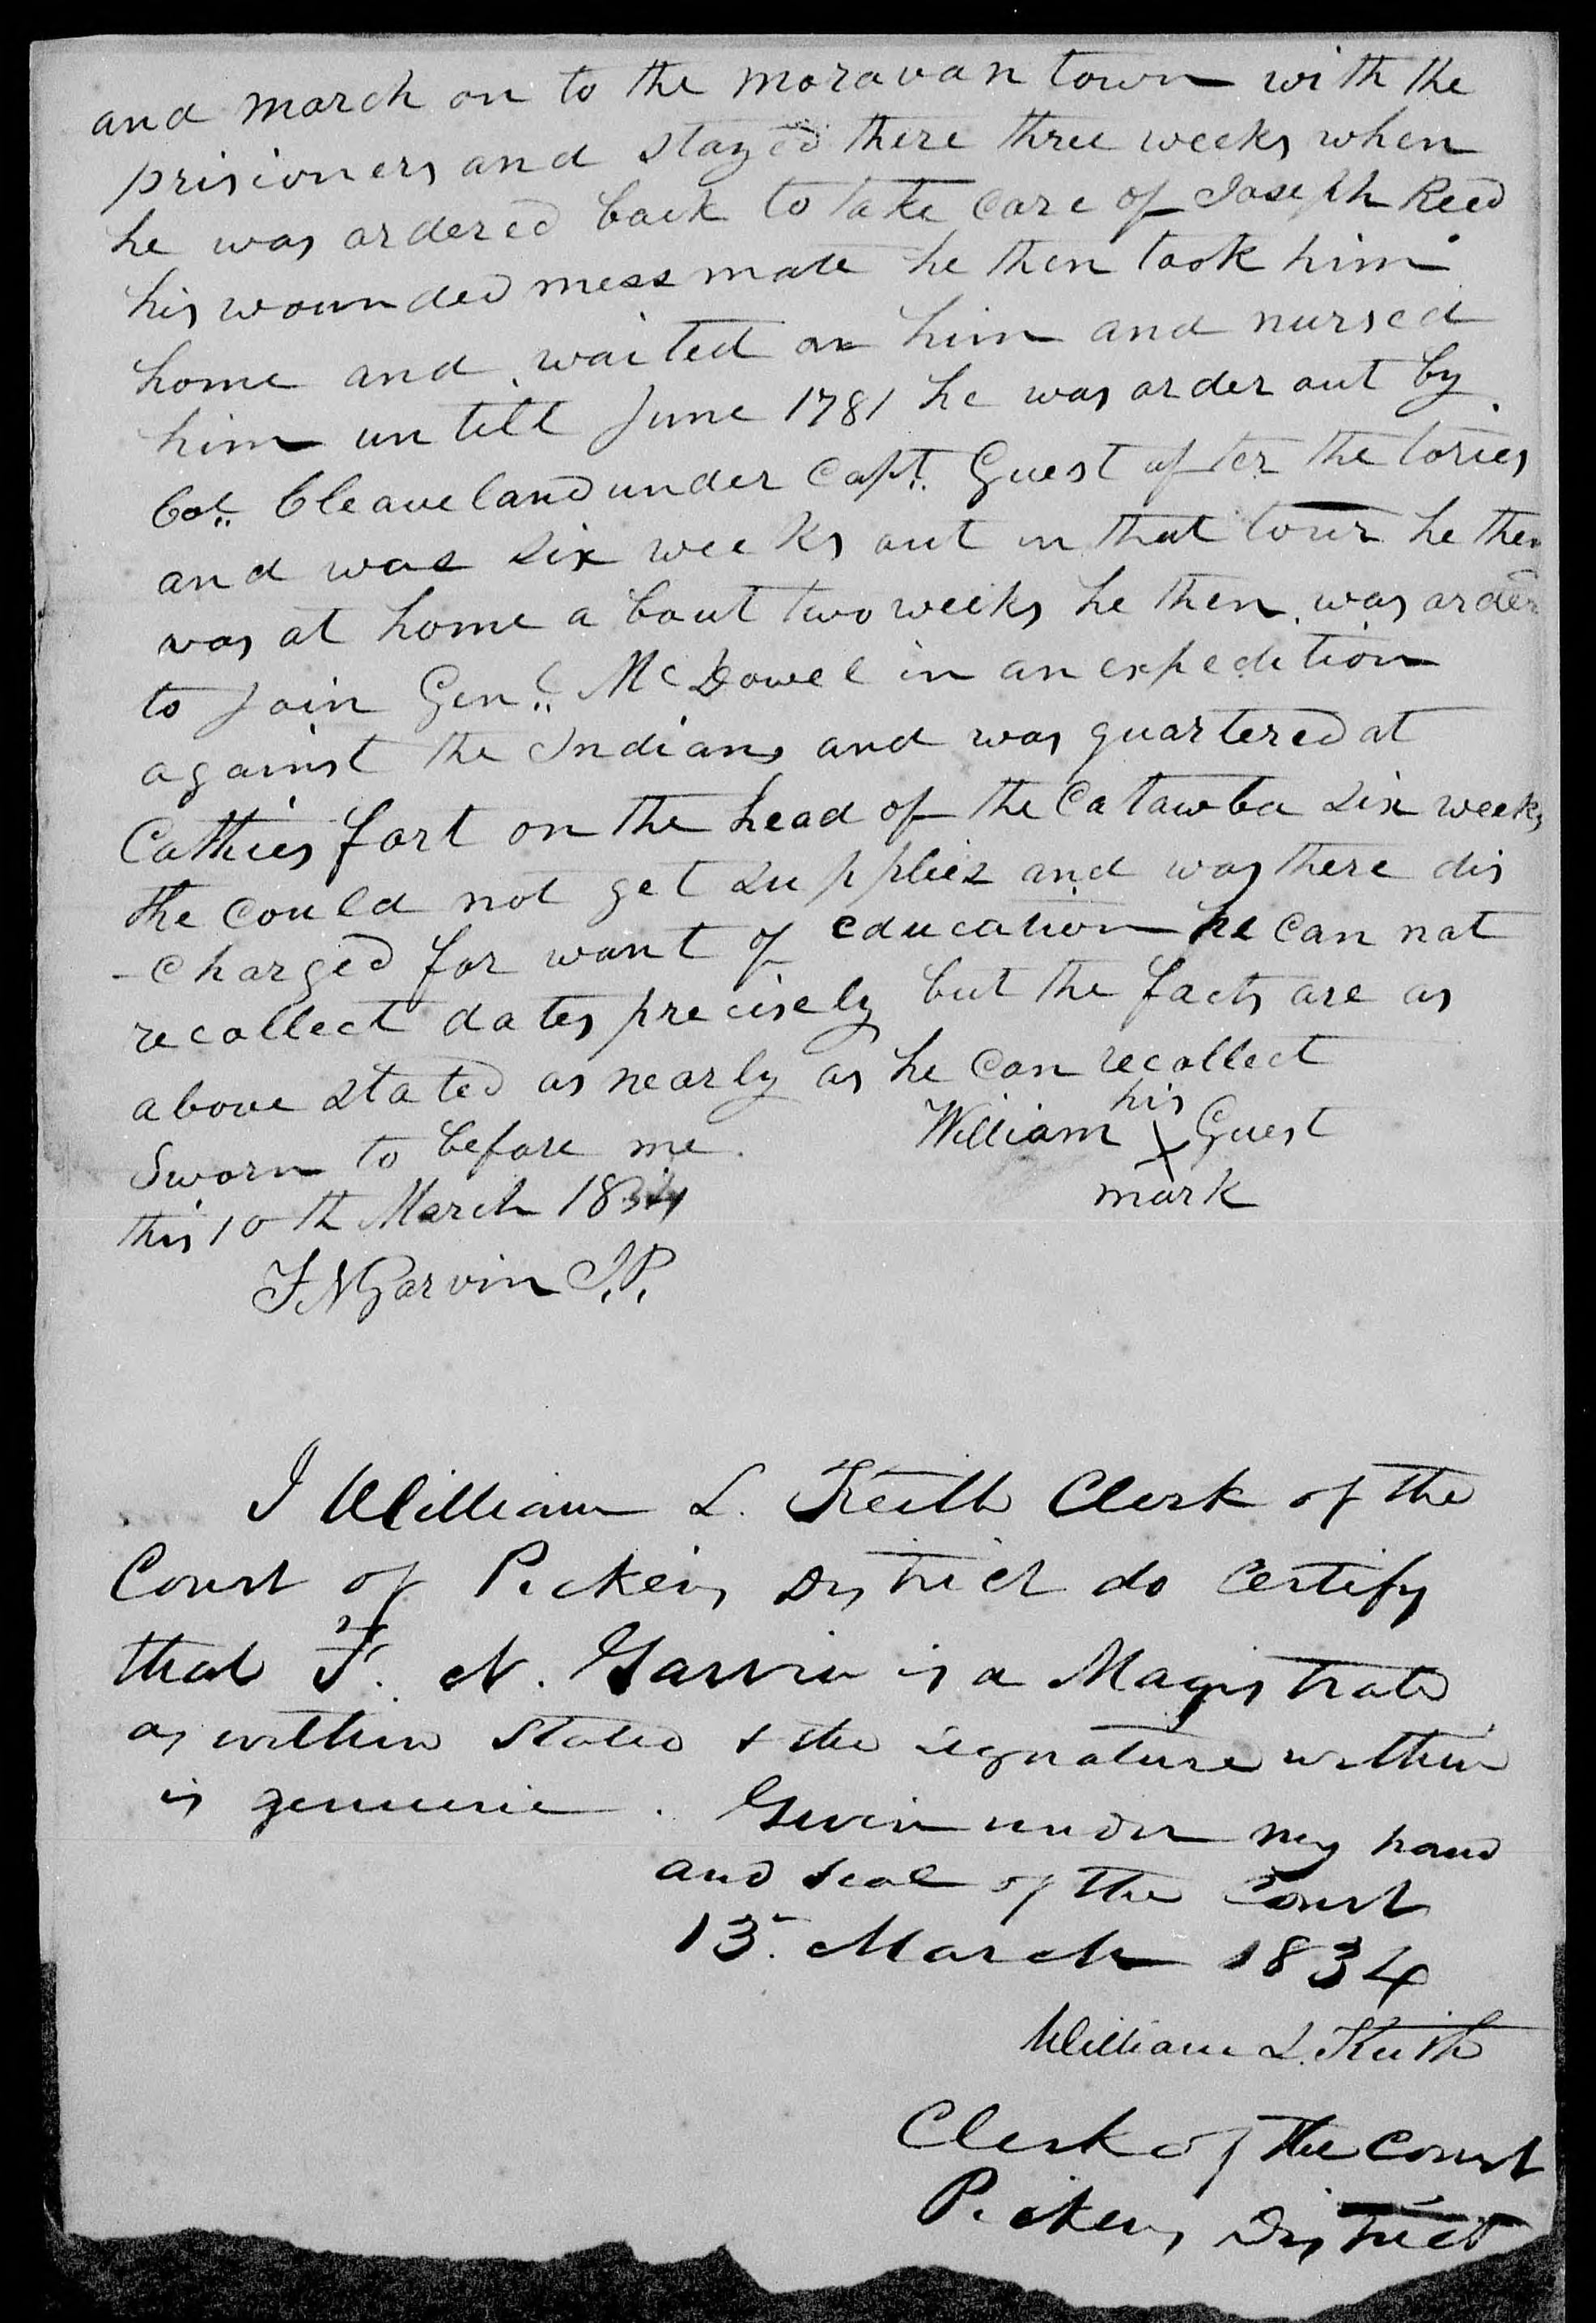 Application for a Veteran's Pension from William Guest, 10 March 1834, page 2